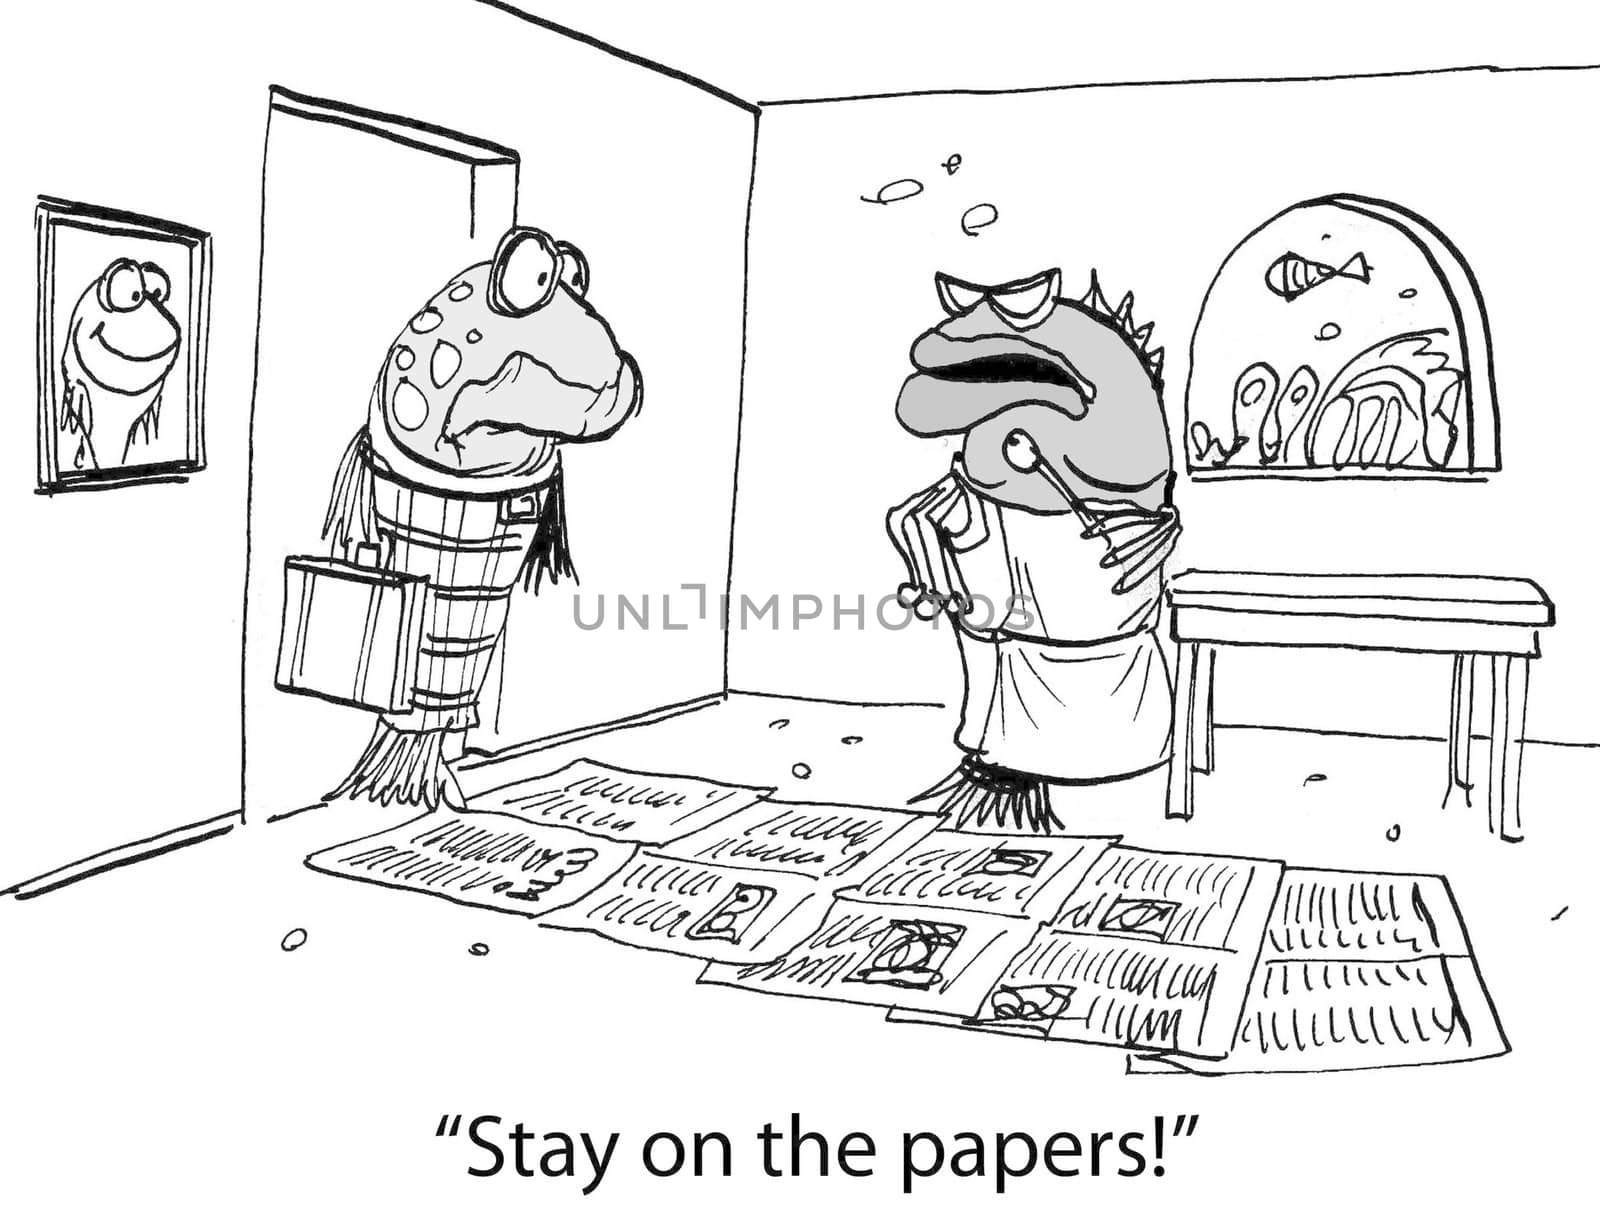 "Stay on the papers!"